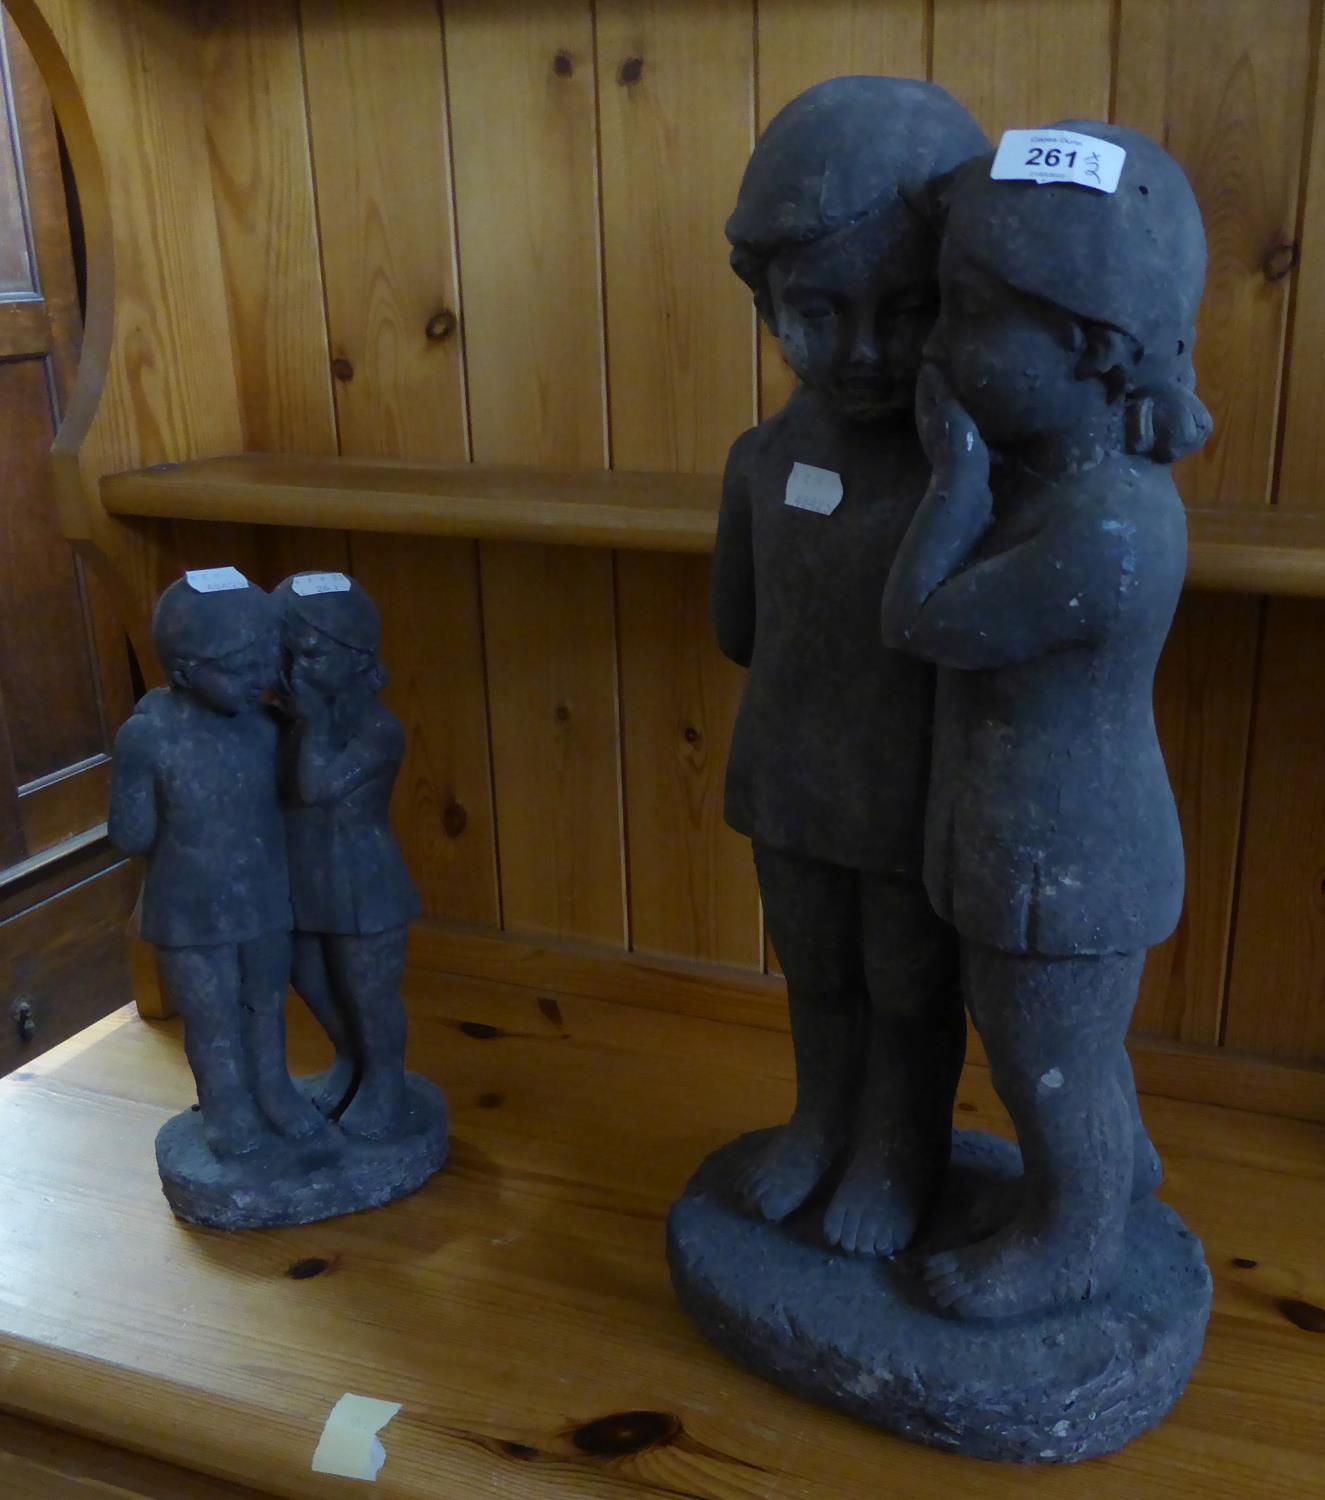 STONE GARDEN ORNAMENT OF TWO CHILDREN AND A SIMILAR SMALL ONE (2)